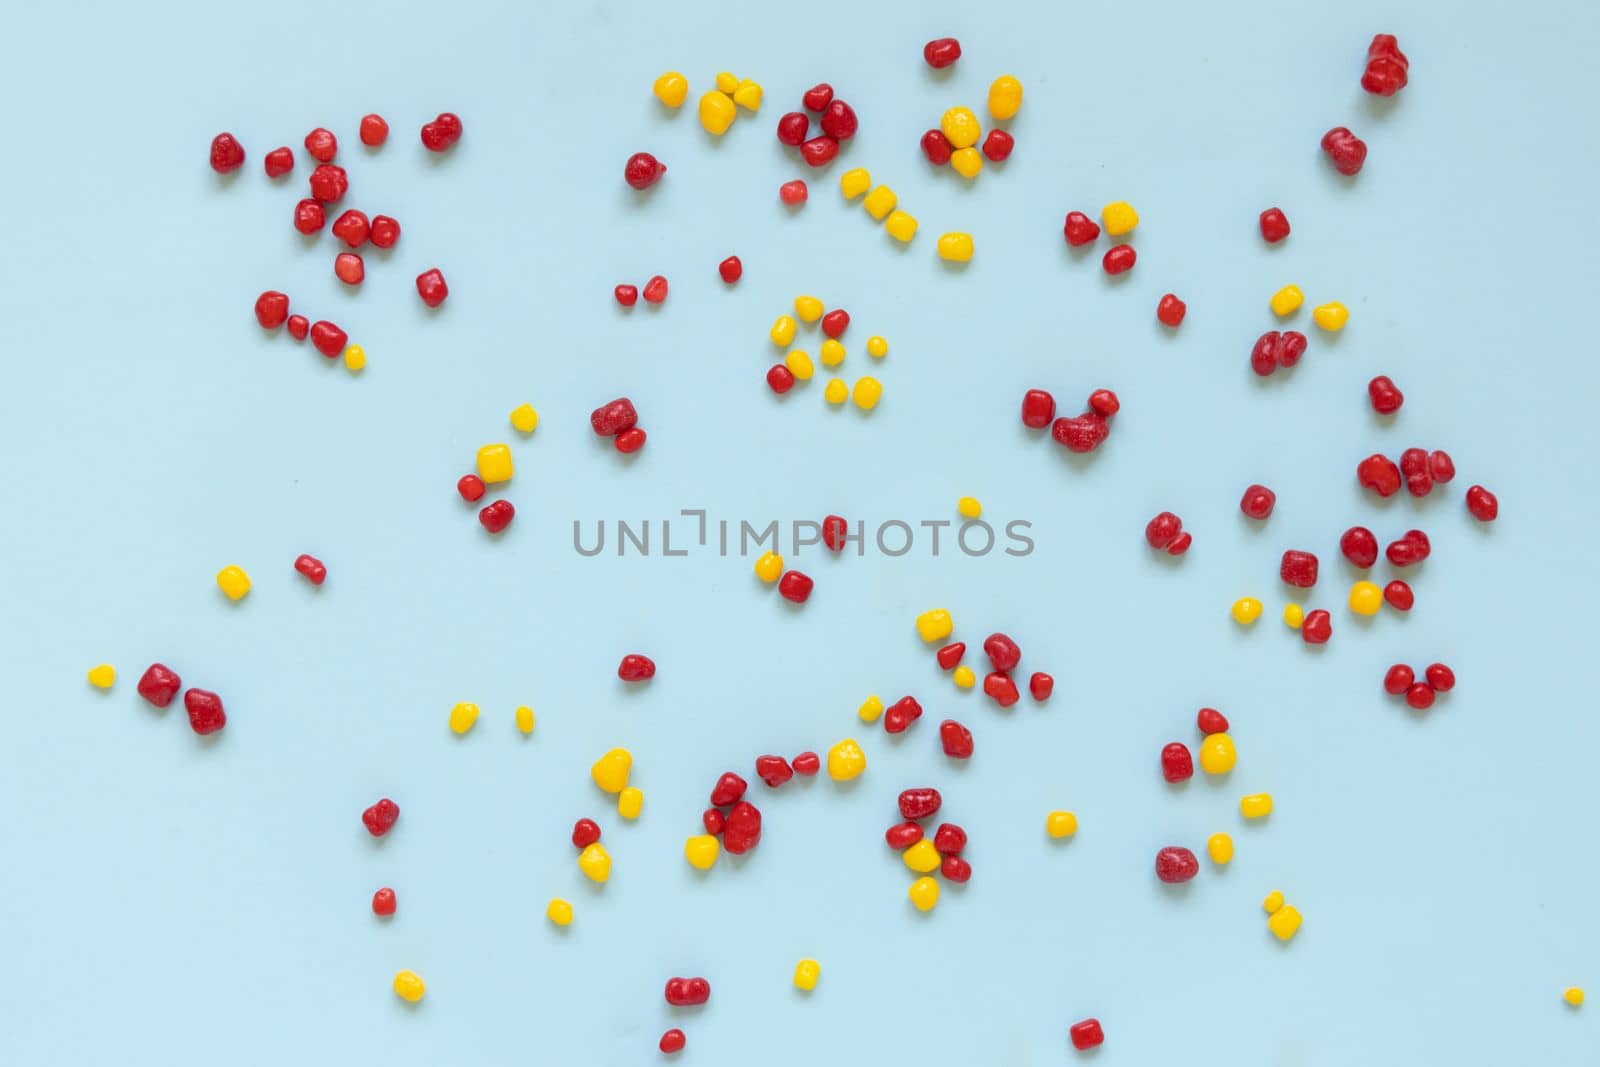 Red and yellow colored candy nerds sprinkled on a blue background